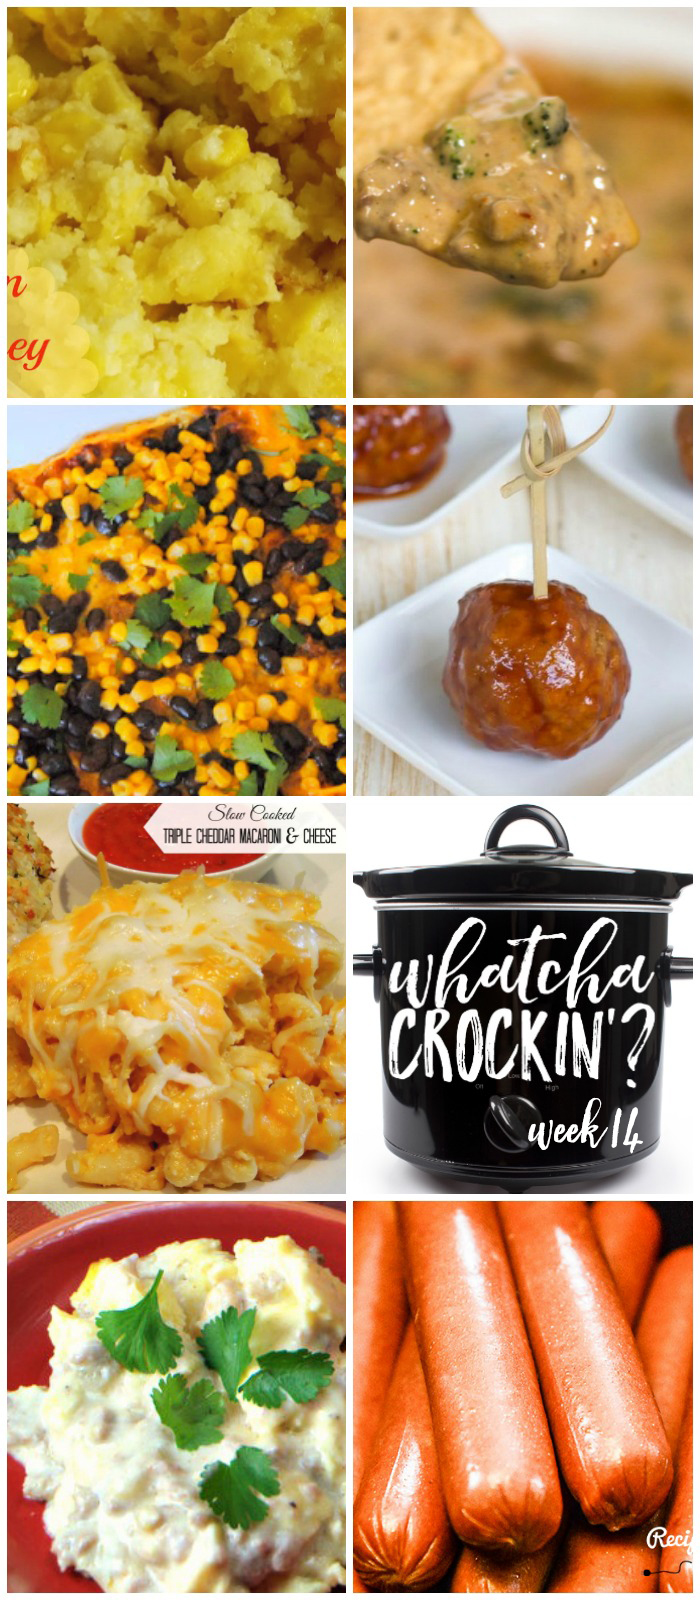 This week's Whatcha Crockin' crock pot recipes include Creamy Cheese Corn Bake, Slow Cooker Triple Cheddar Mac n Cheese, Cooking Hot Dogs in Bulk, Crock Pot Cherry Jalapeno Meatballs, Crock Pot Scrambled Eggs Casserole, Beefy Broccoli Dip, Crock Pot Tex Mex Casserole and much more!